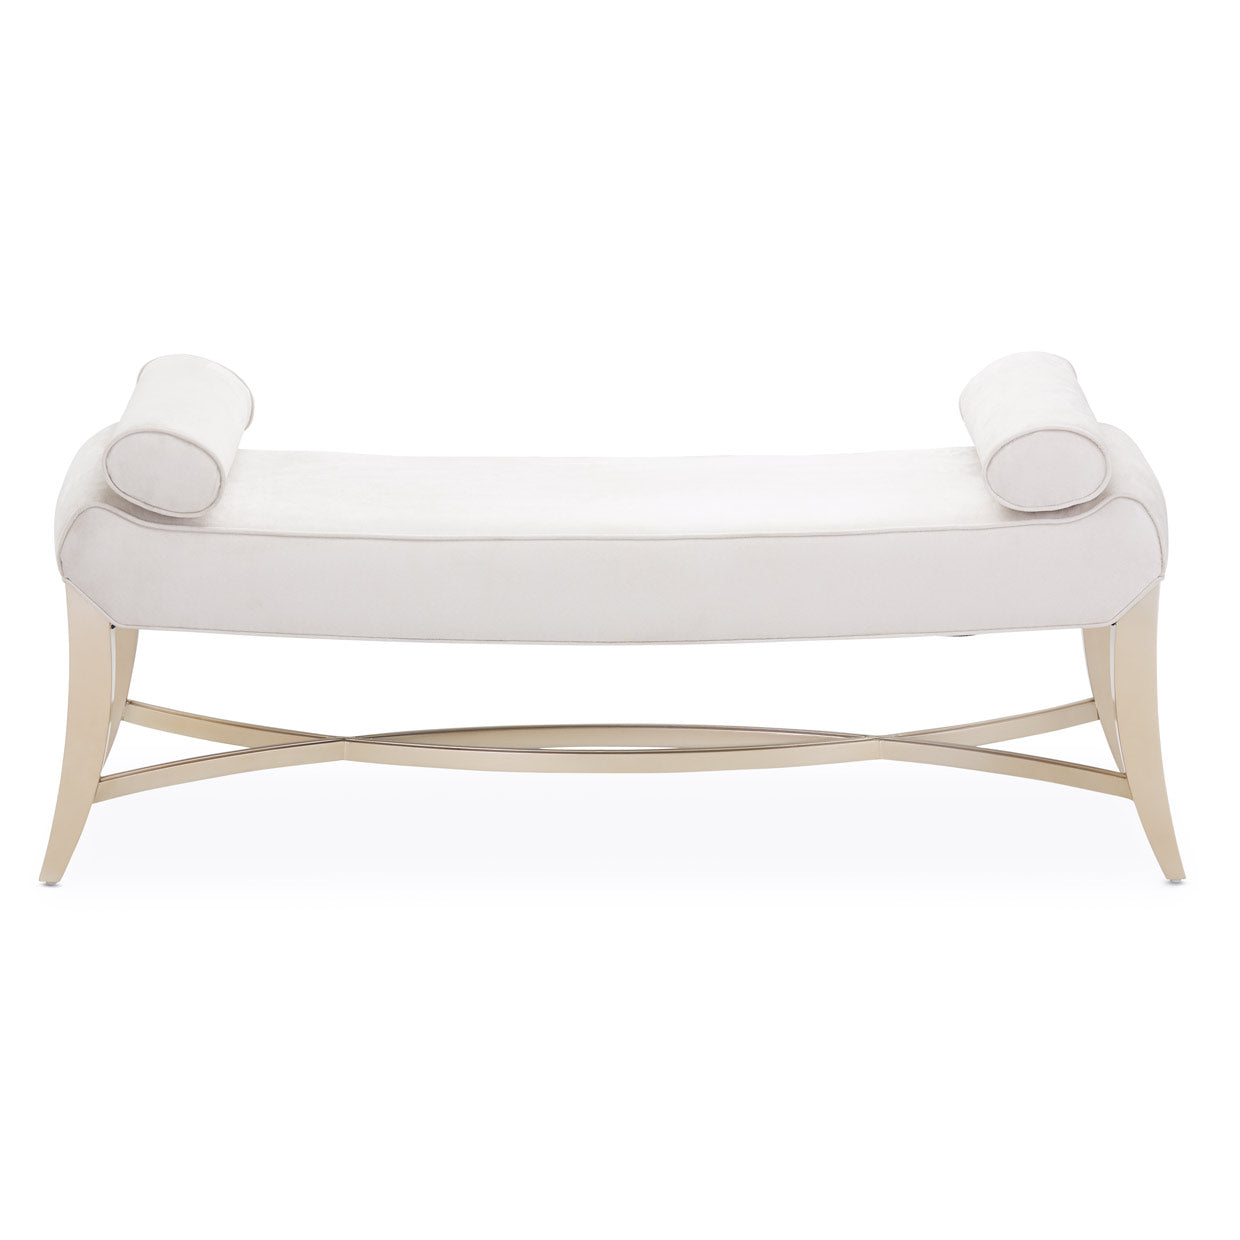 Malibu Crest Bed Bench, Classic silhouette, Modern luxury, Bedroom seating, Soft neutrals, Club chair silhouette, Faux suede upholstery, Doeskin color, Chardonnay finish, Bedroom furniture, dream art, Michael amini